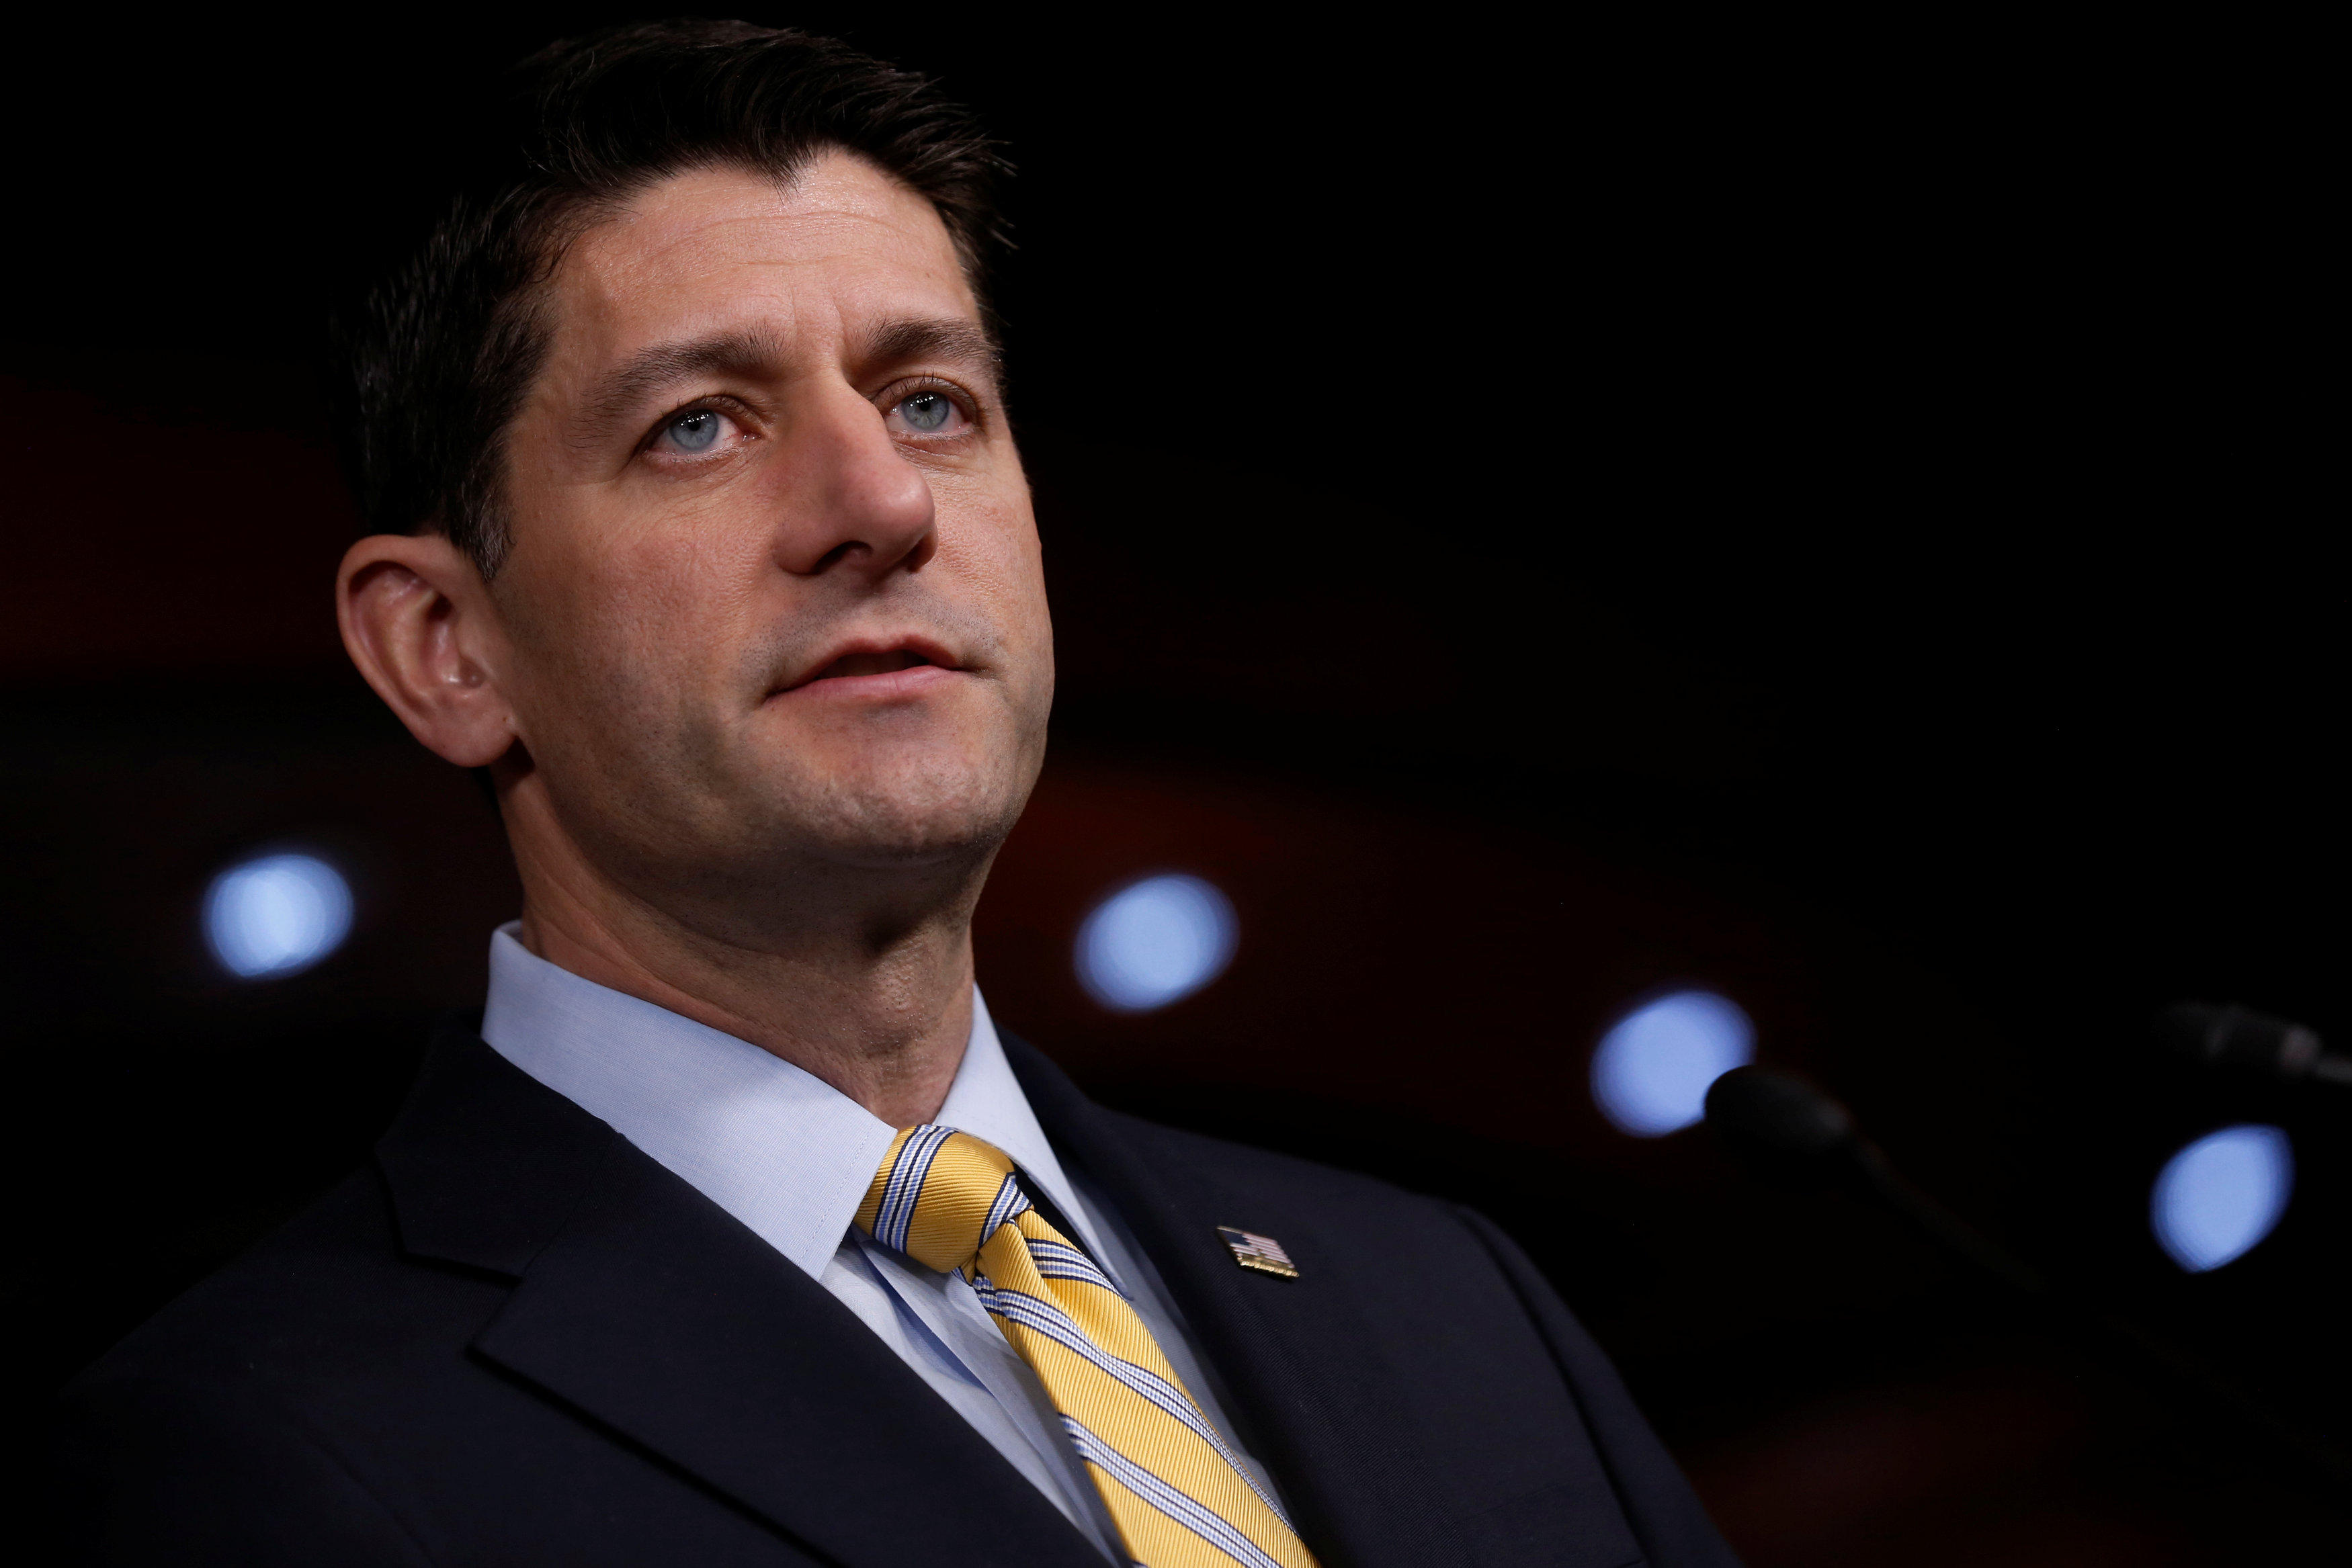 Paul Ryan indicates GOP will strip federal funding from Planned Parenthood - CBS News